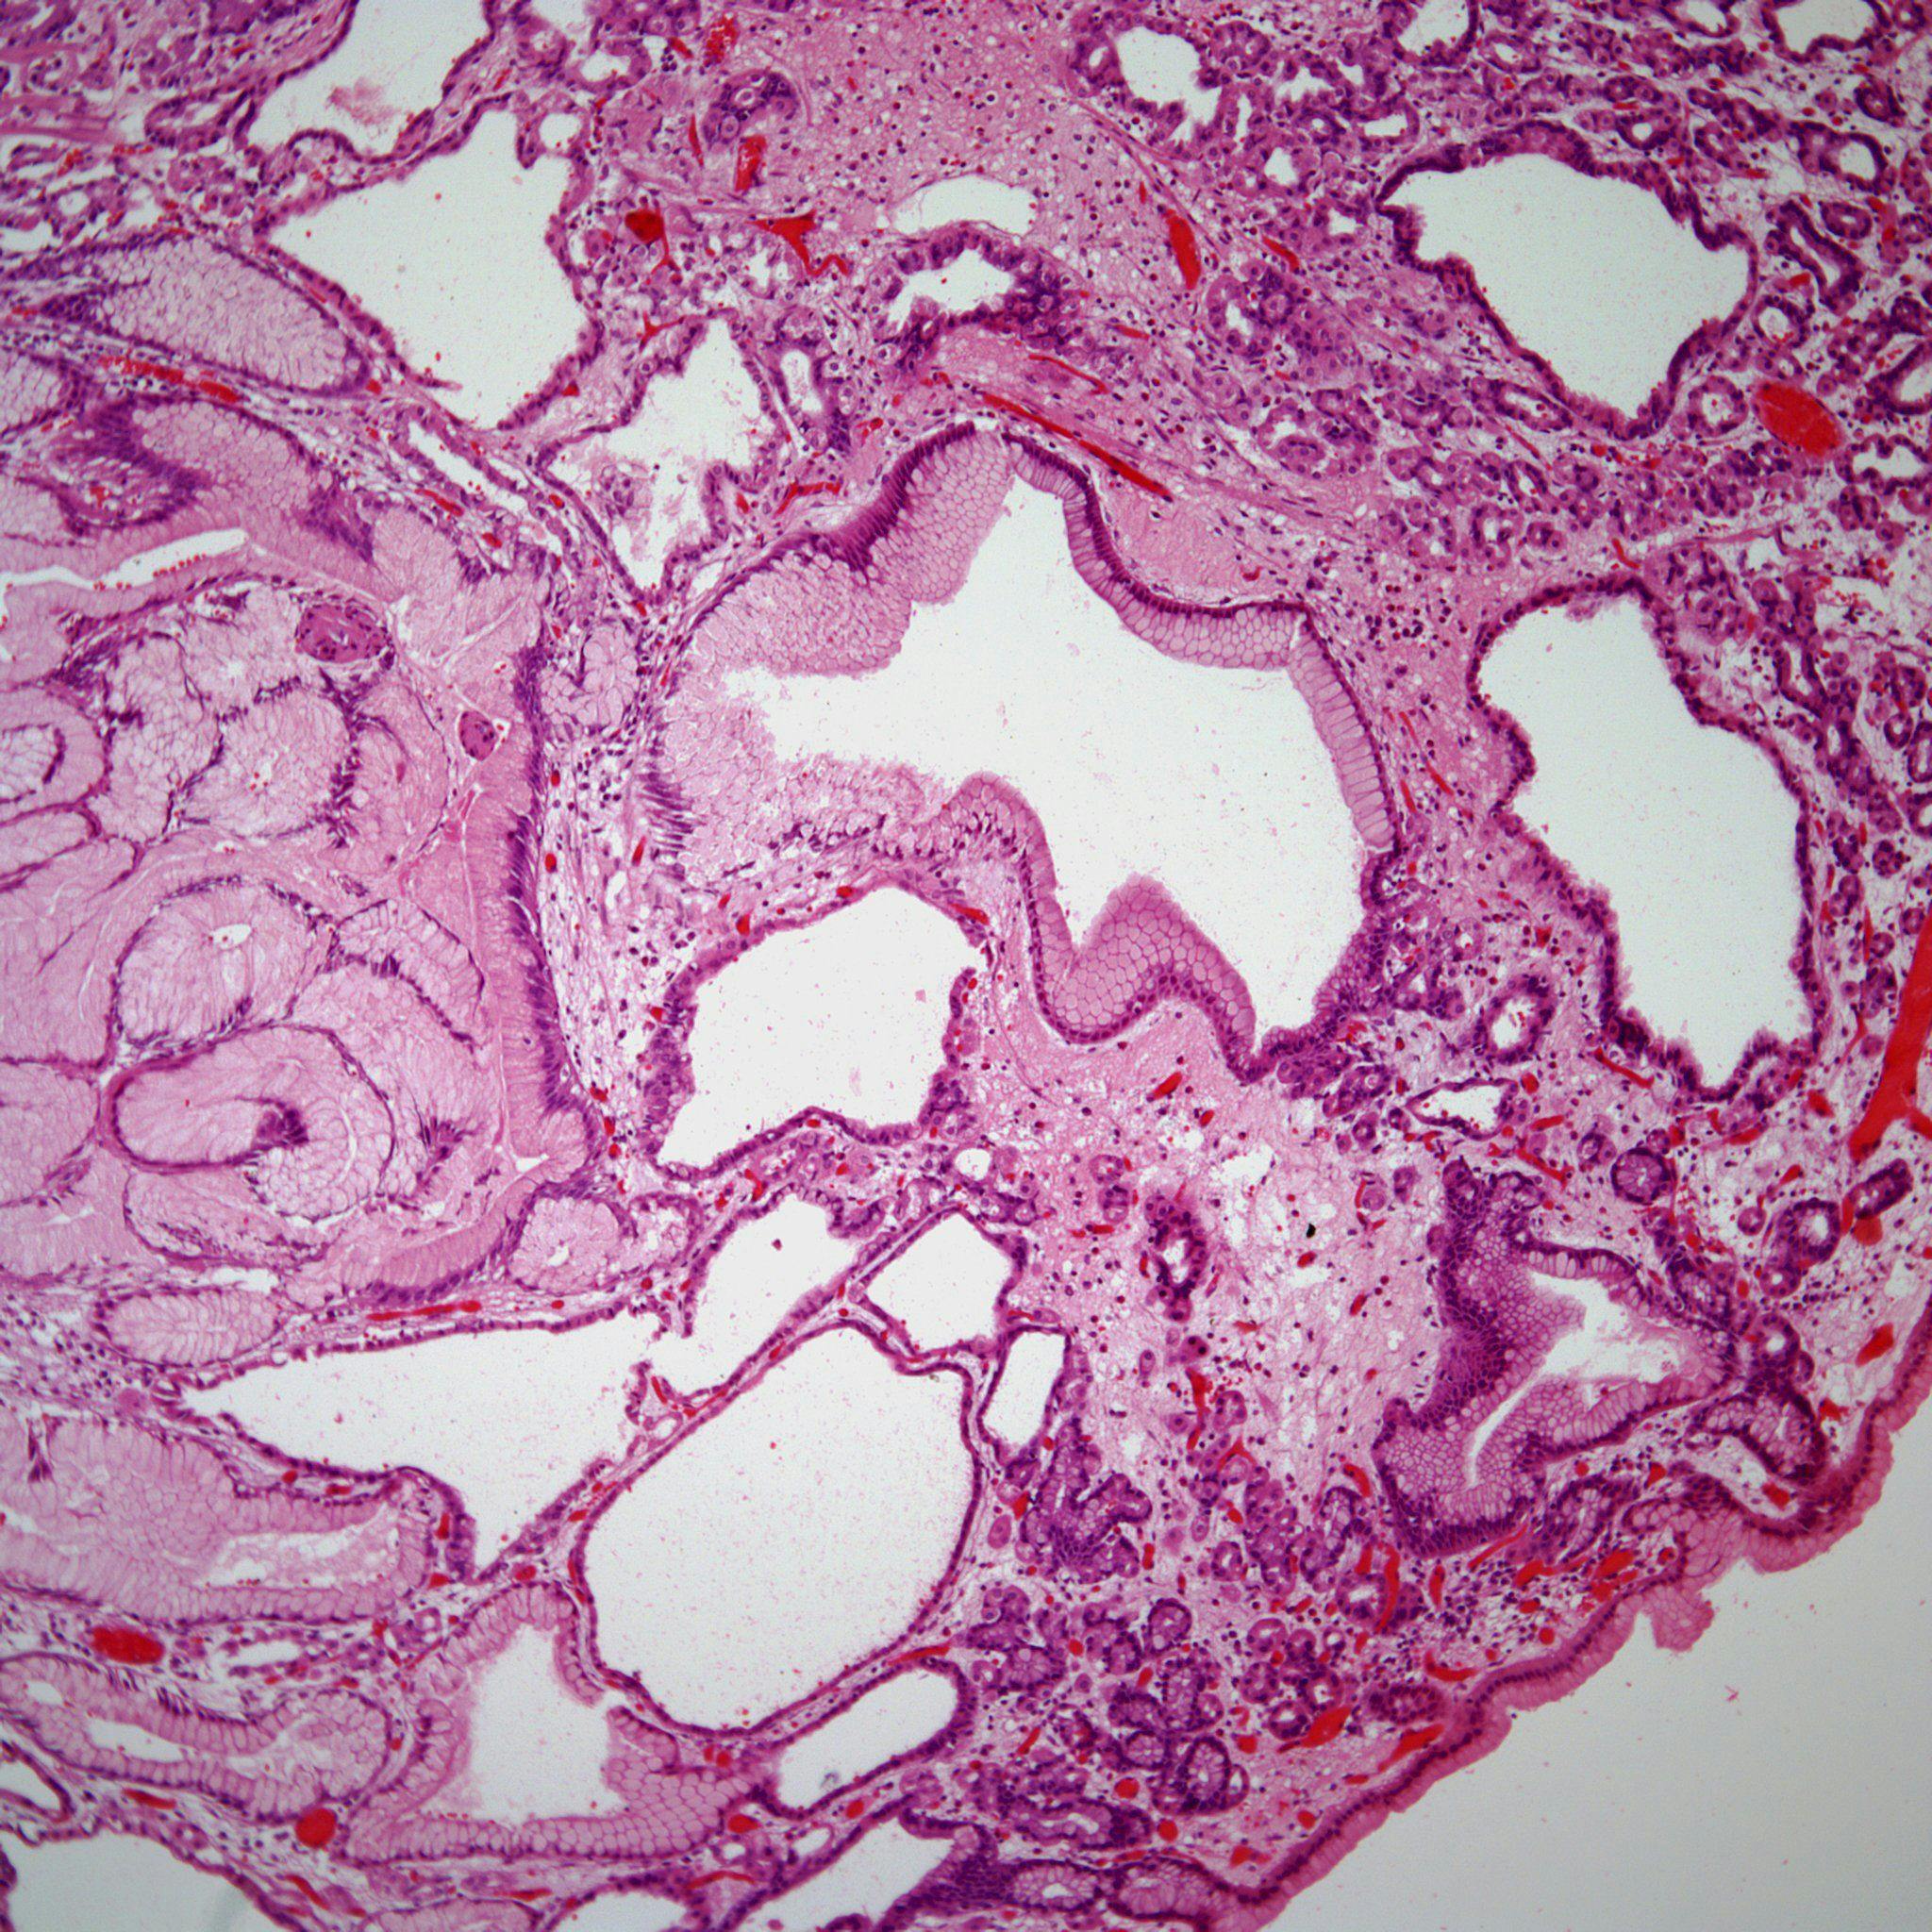 A 40-Year-Old With a Stomach Nodule